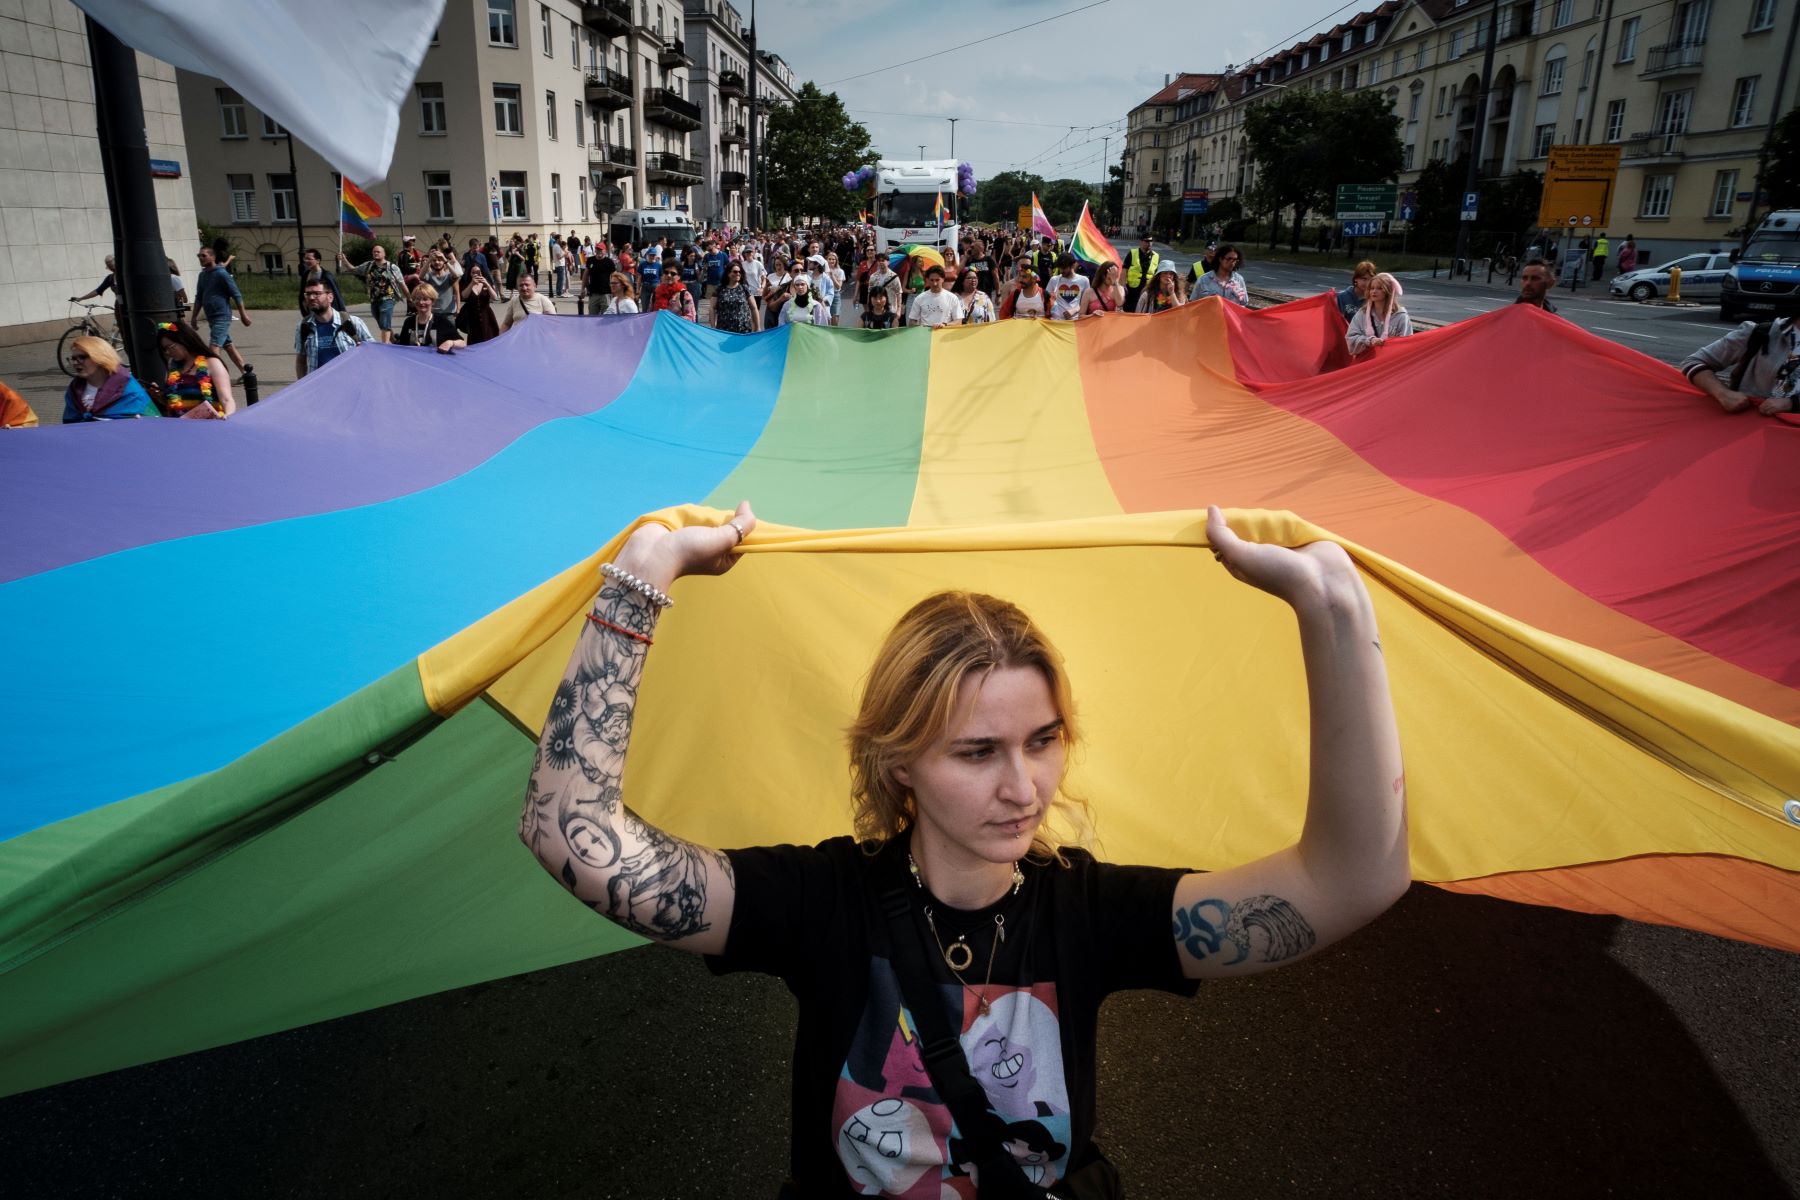 People In Poland Held A Huge Pride March To Demand The Right-Wing Government Stop Attacking LGBTQ Rights